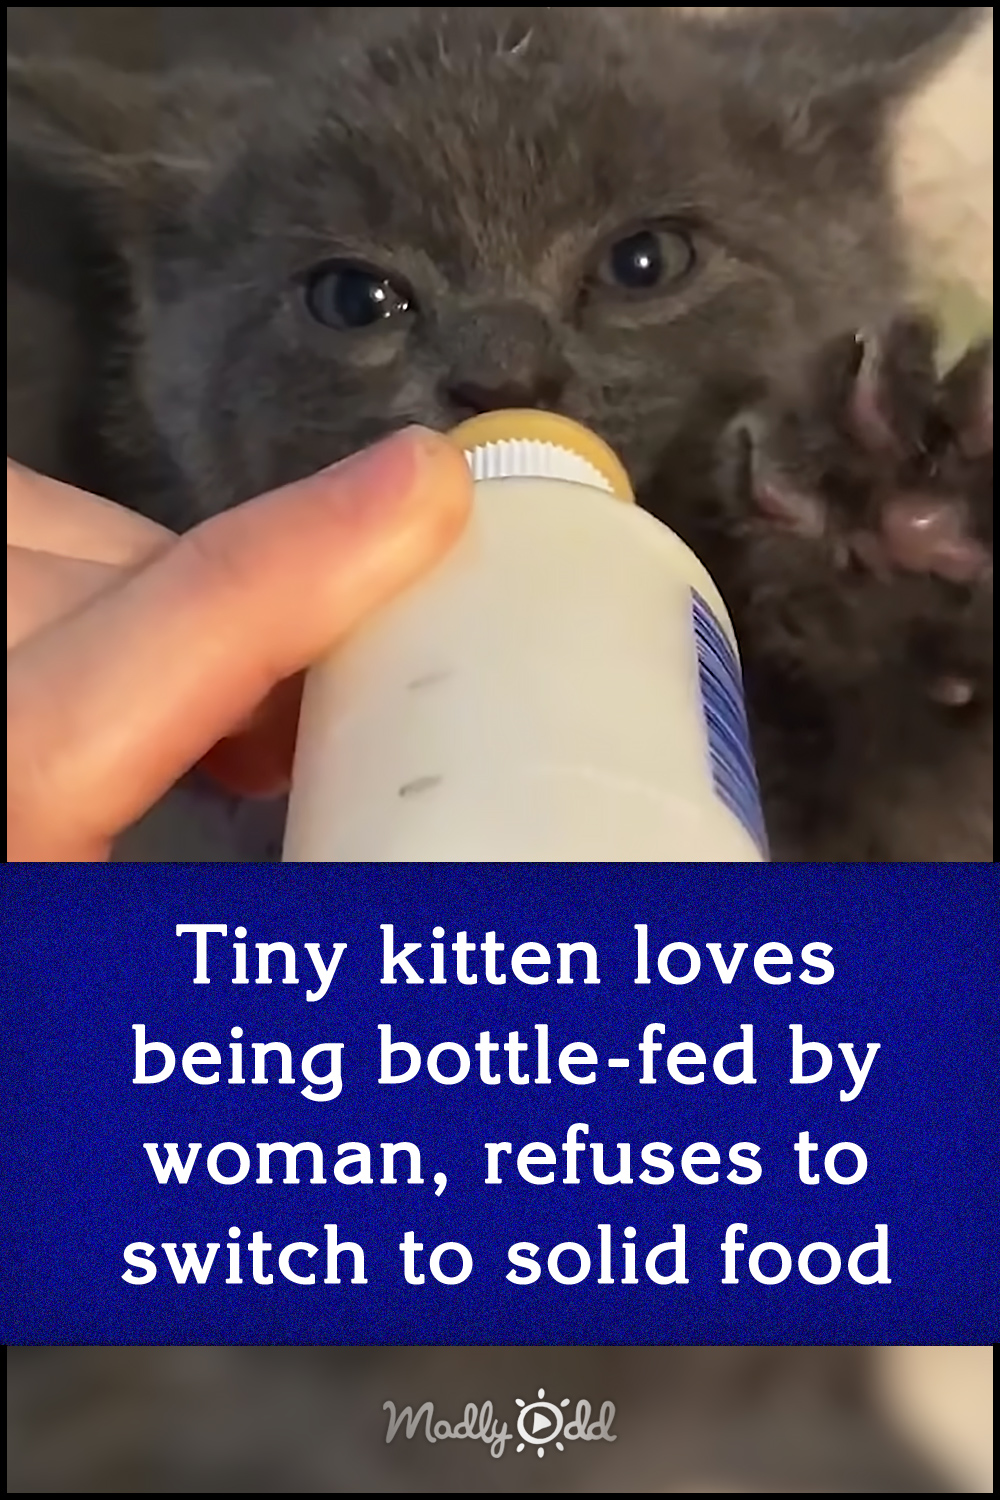 Tiny kitten loves being bottle-fed by woman, refuses to switch to solid food